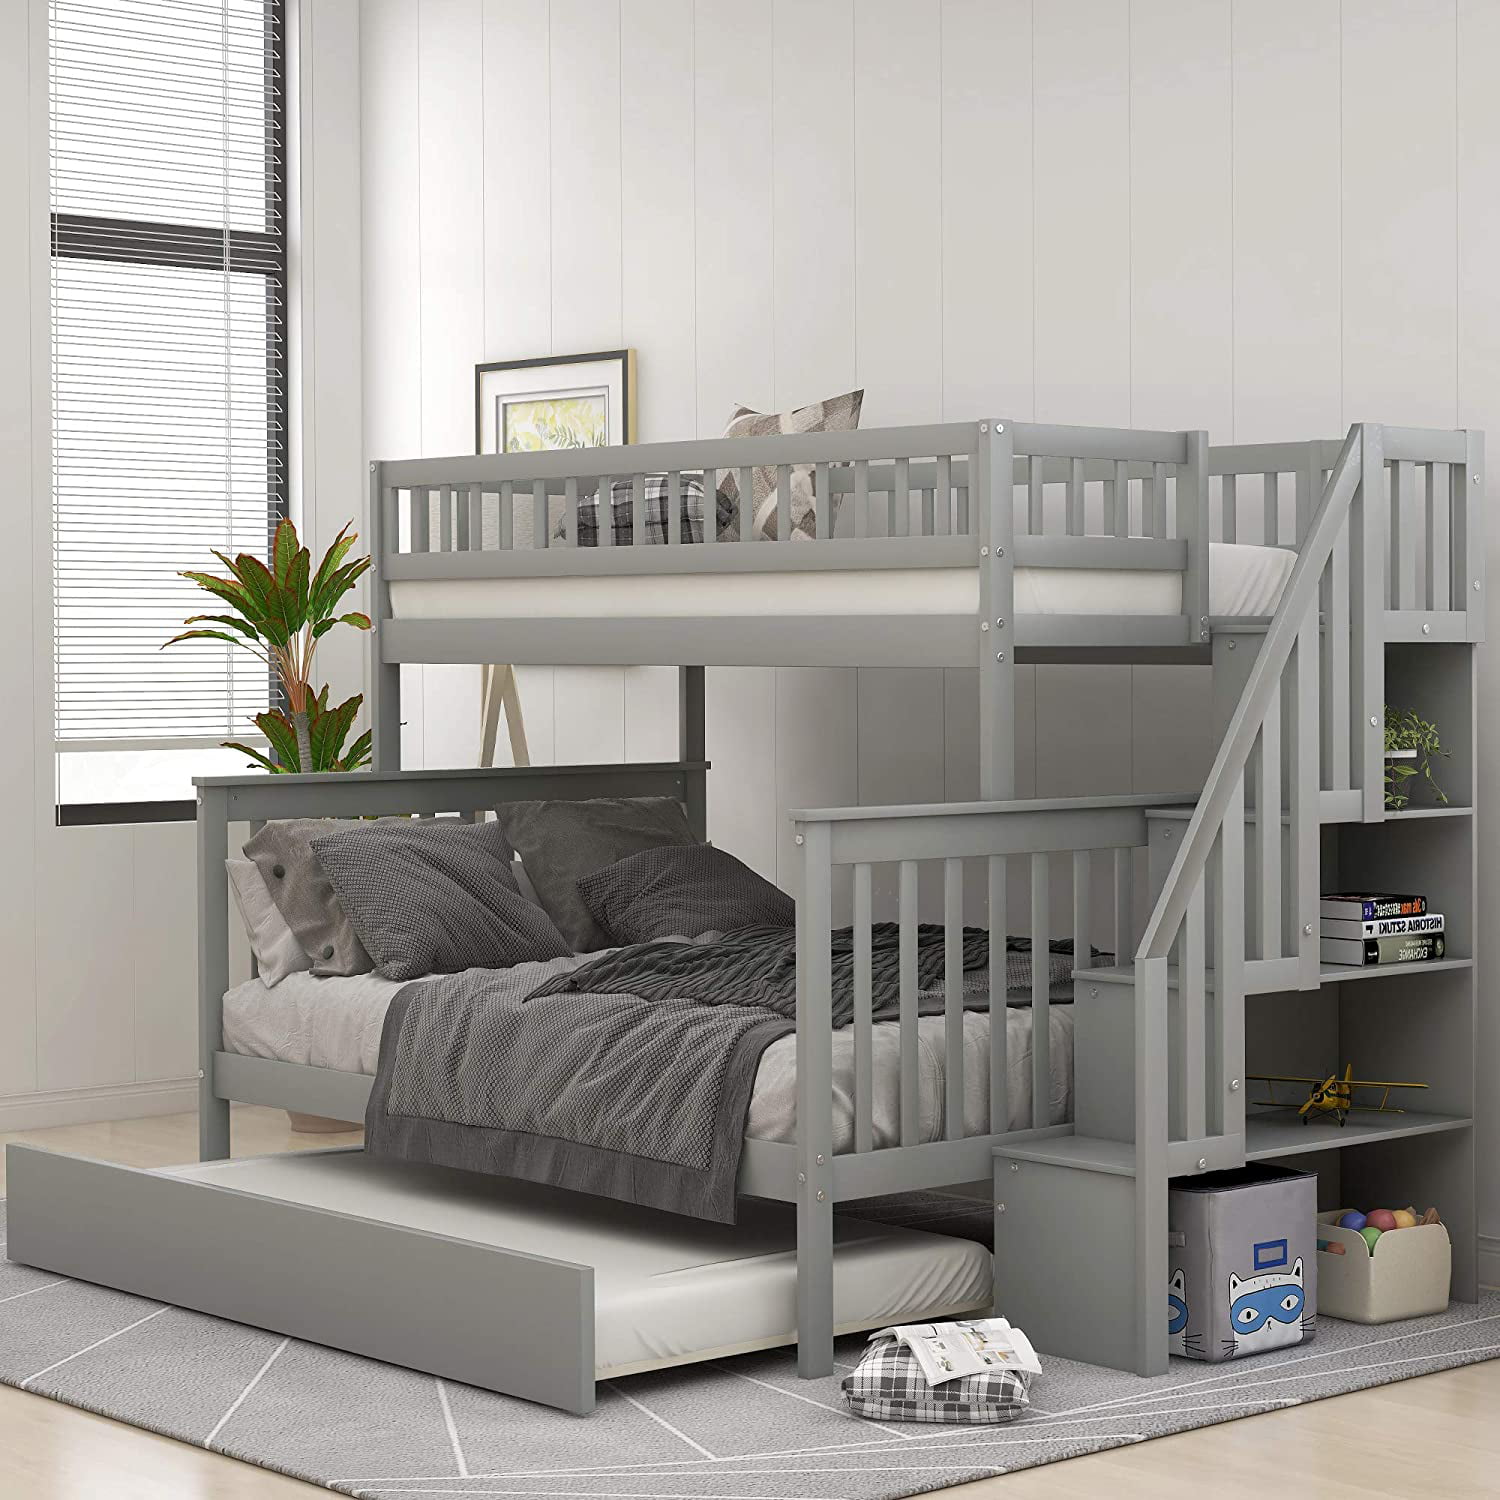 Piscis Pine Wood Bunk Bed With Trundle, Wood Bunk Beds Twin Over Full With Trundle